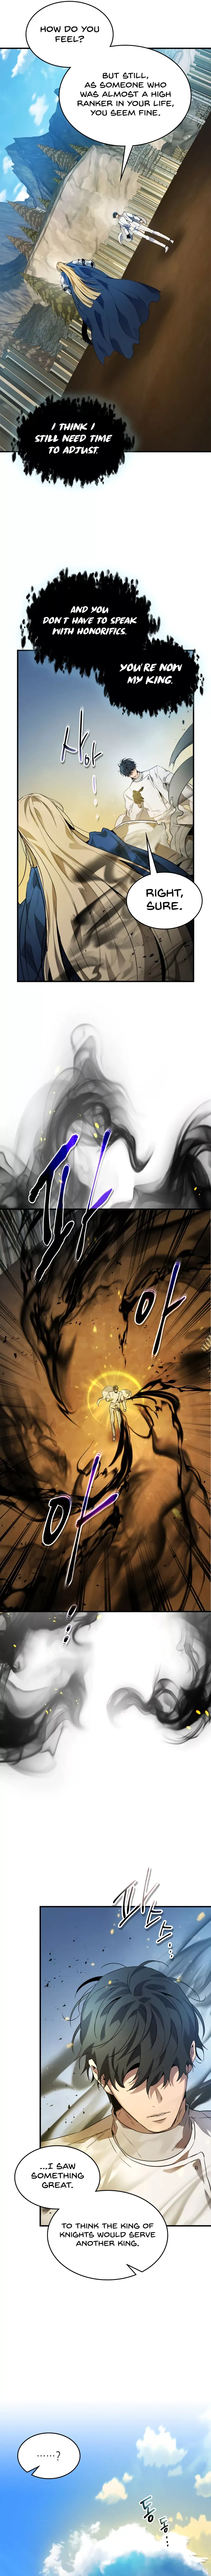 Leveling With The Gods Chapter 95 page 3